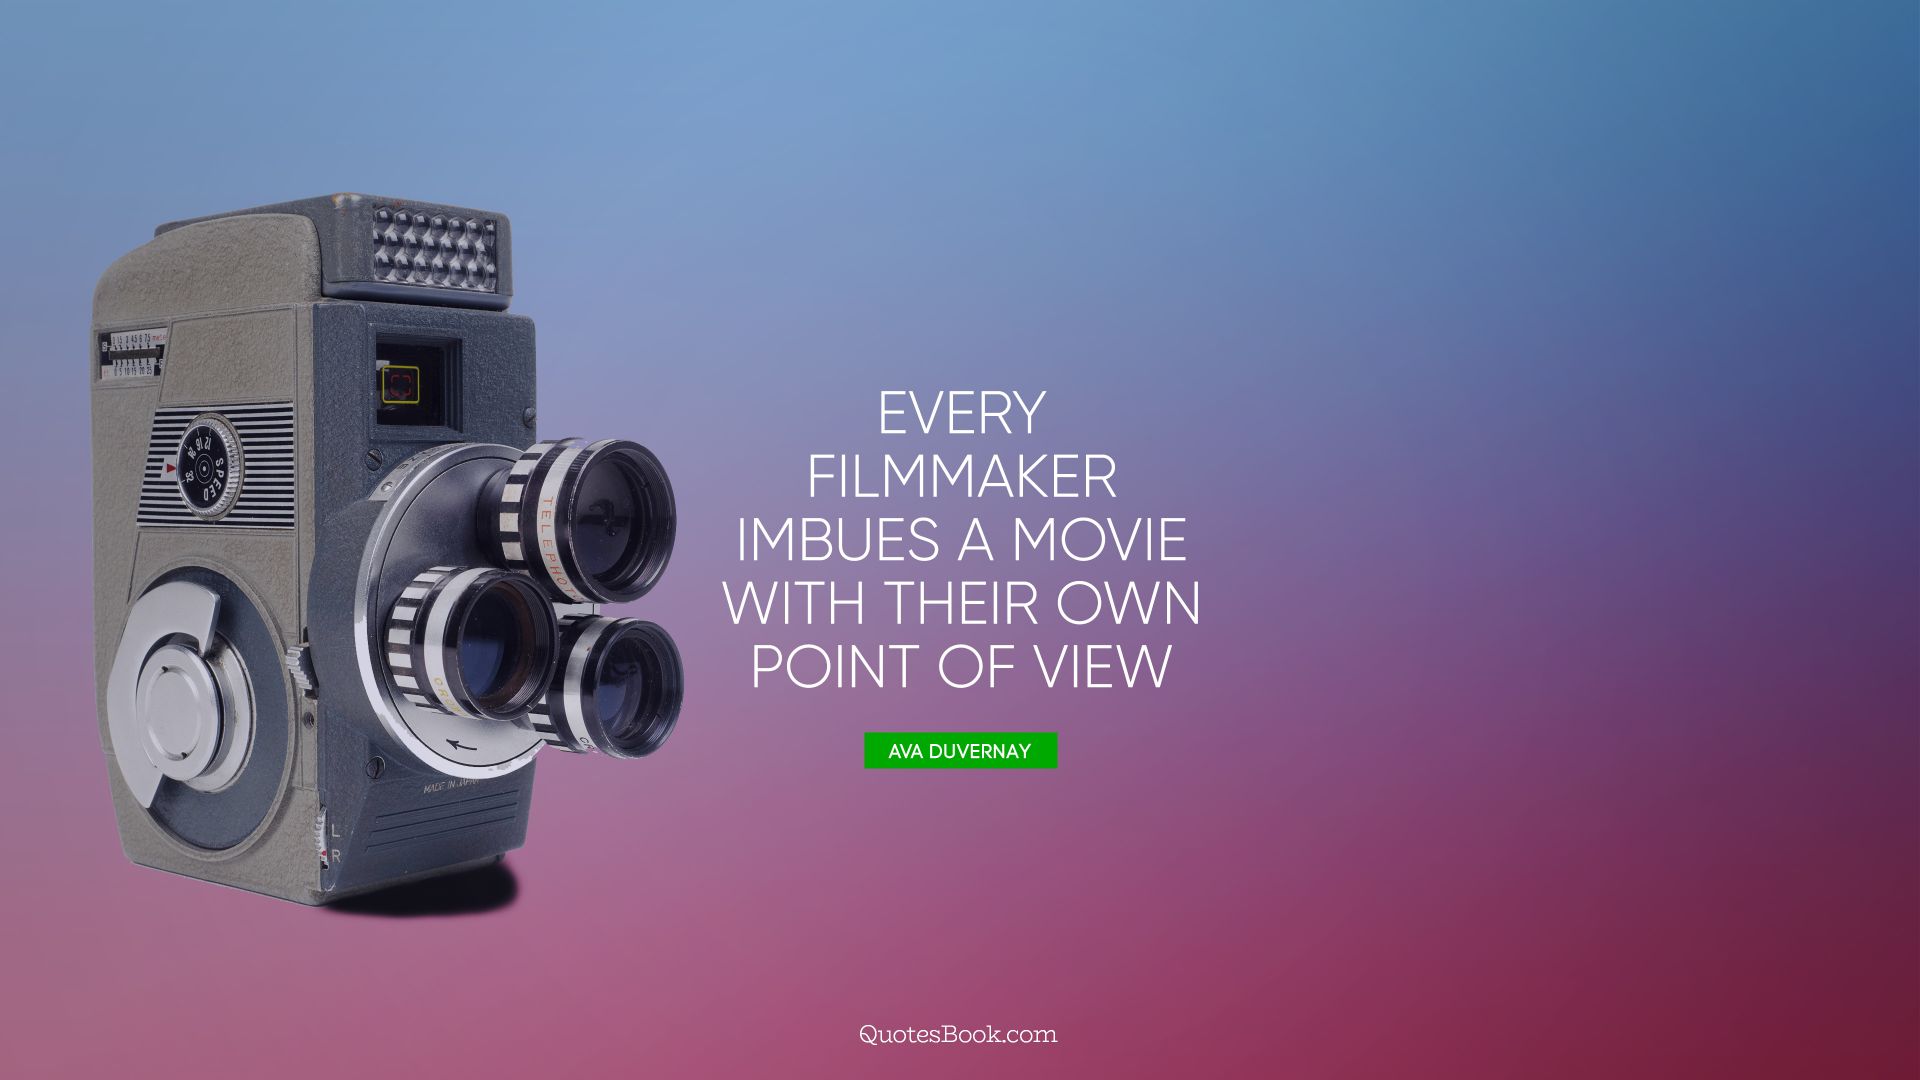 Every filmmaker imbues a movie with their own point of view. - Quote by Ava DuVernay